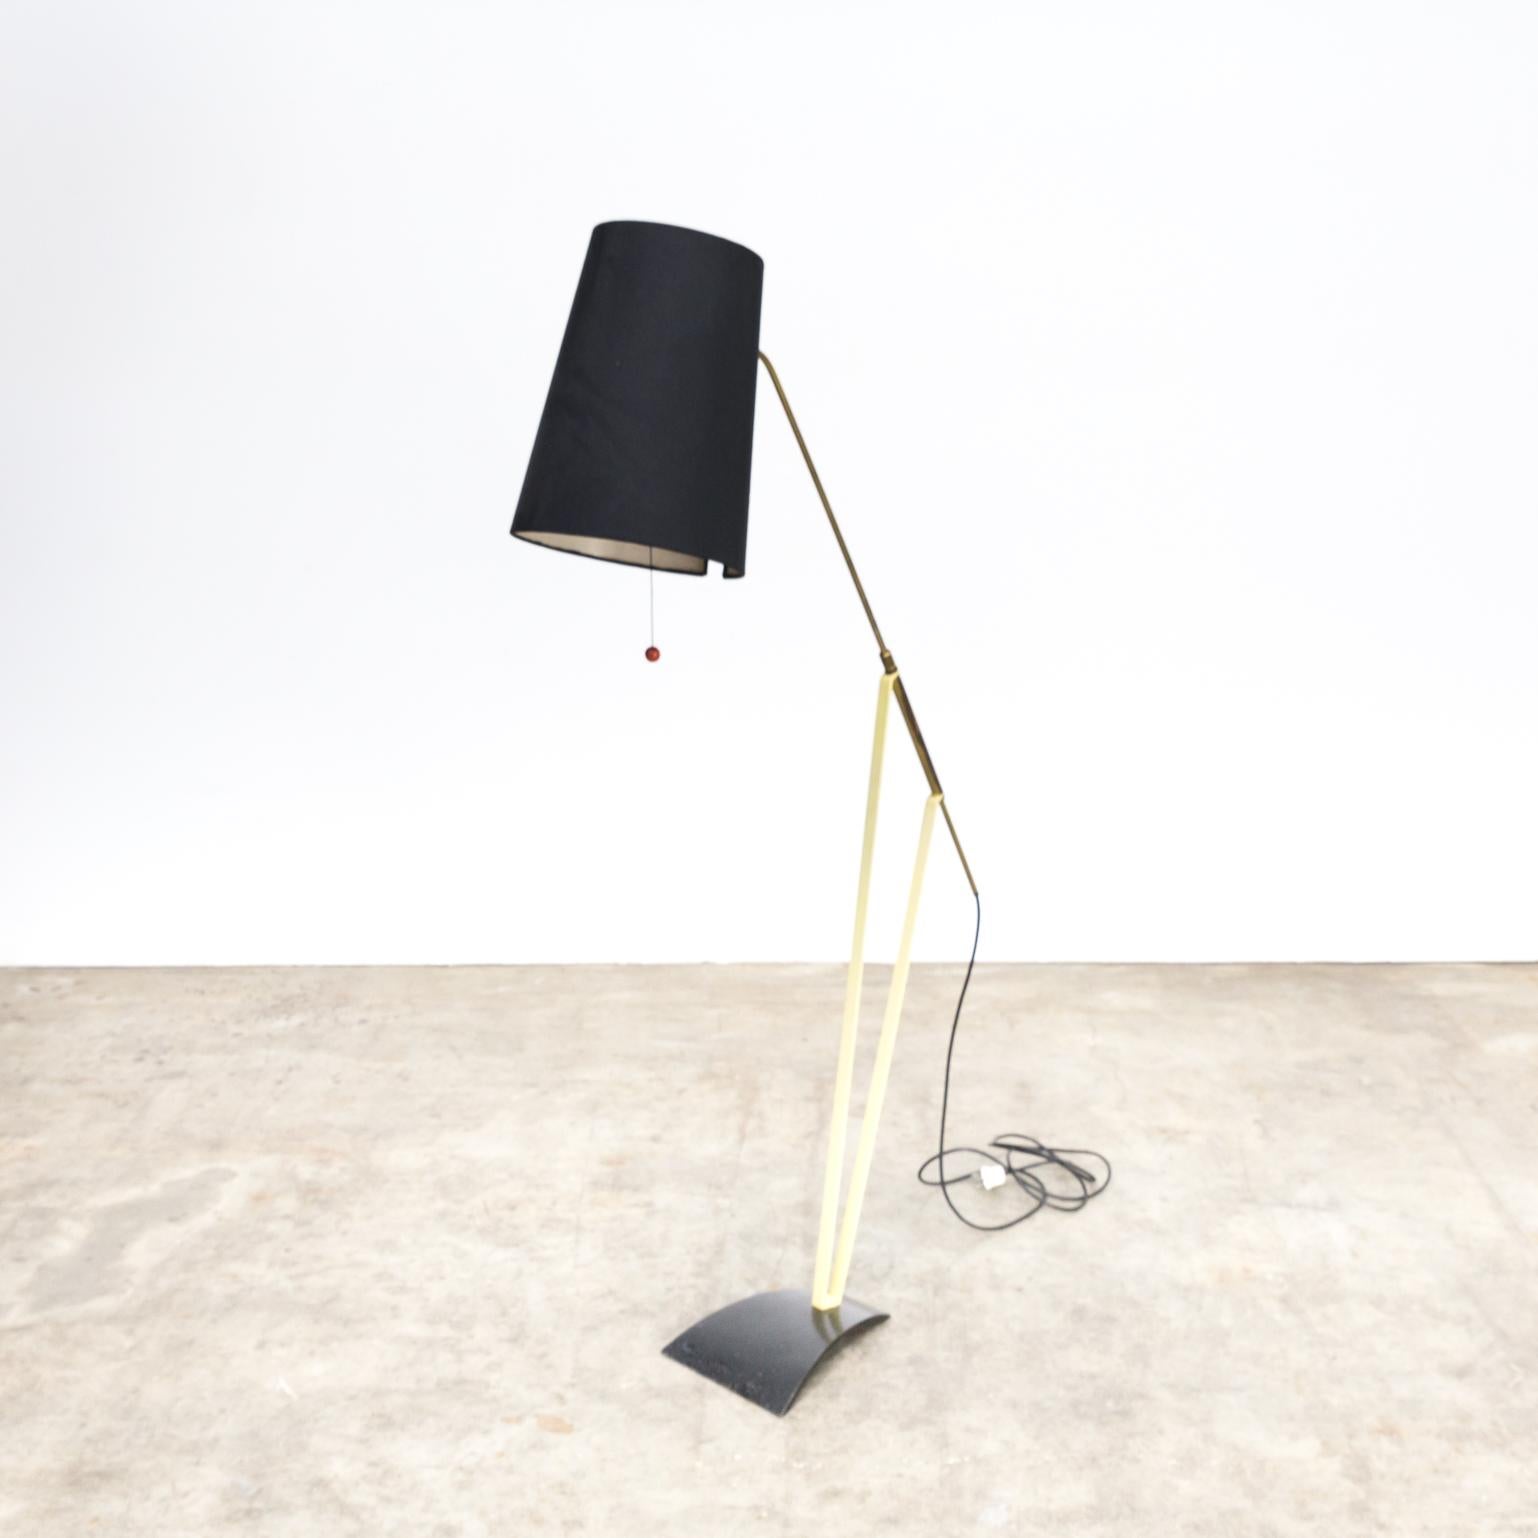 1950s Hans Bergström Floor Lamp with Adjustable Fabric Shade for Ateljé Lyktan For Sale 3